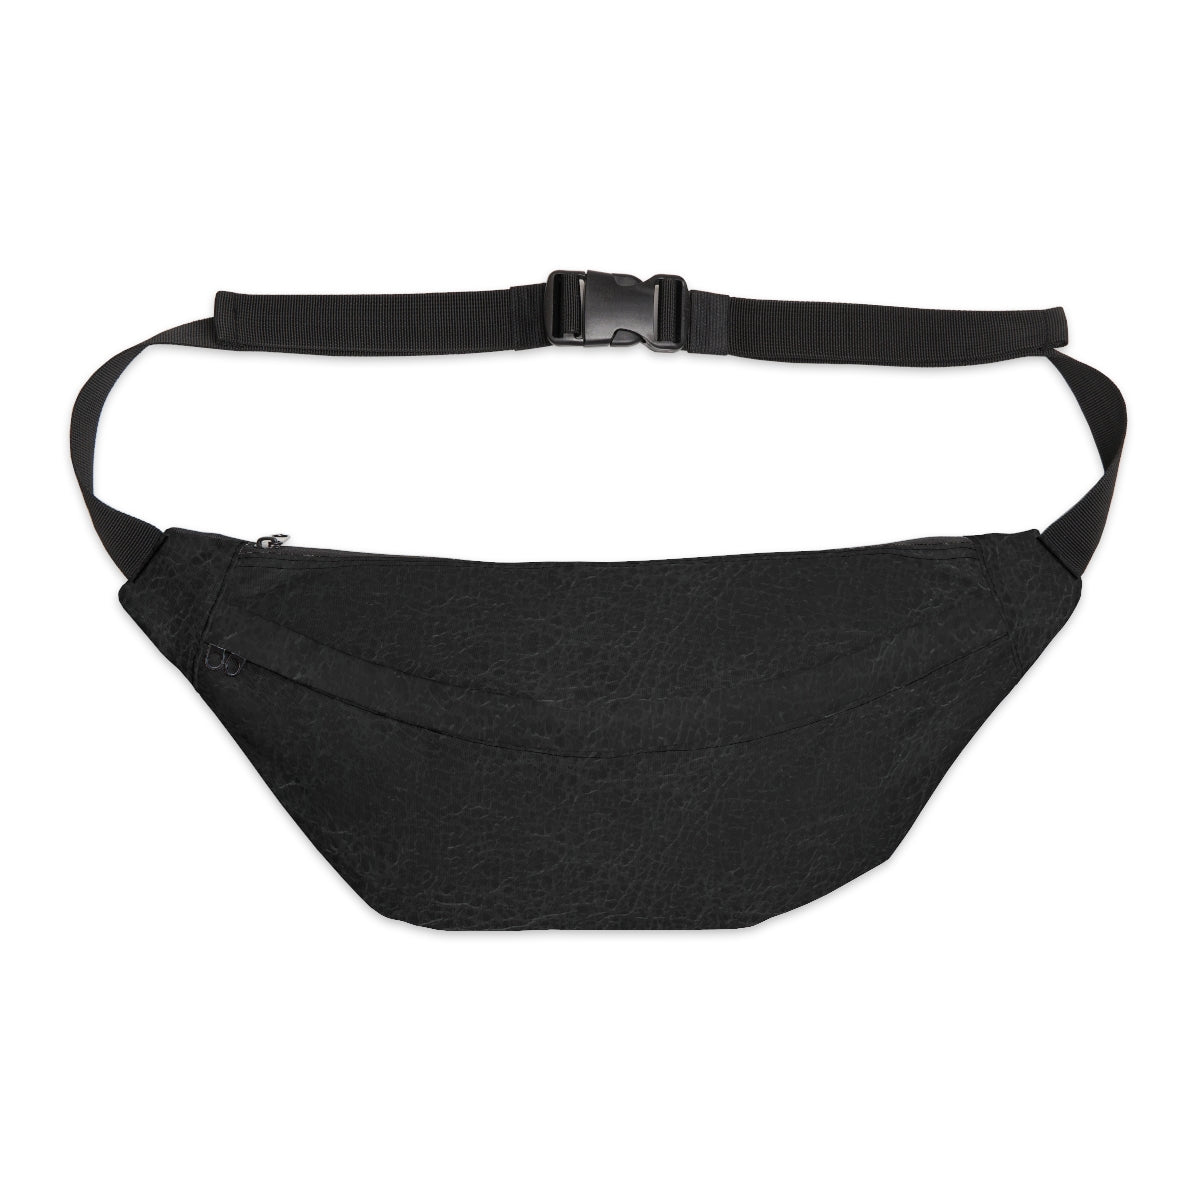 LEATHERTONE [Black] Large Fanny Pack | CANAANWEAR | Bags | All Over Print